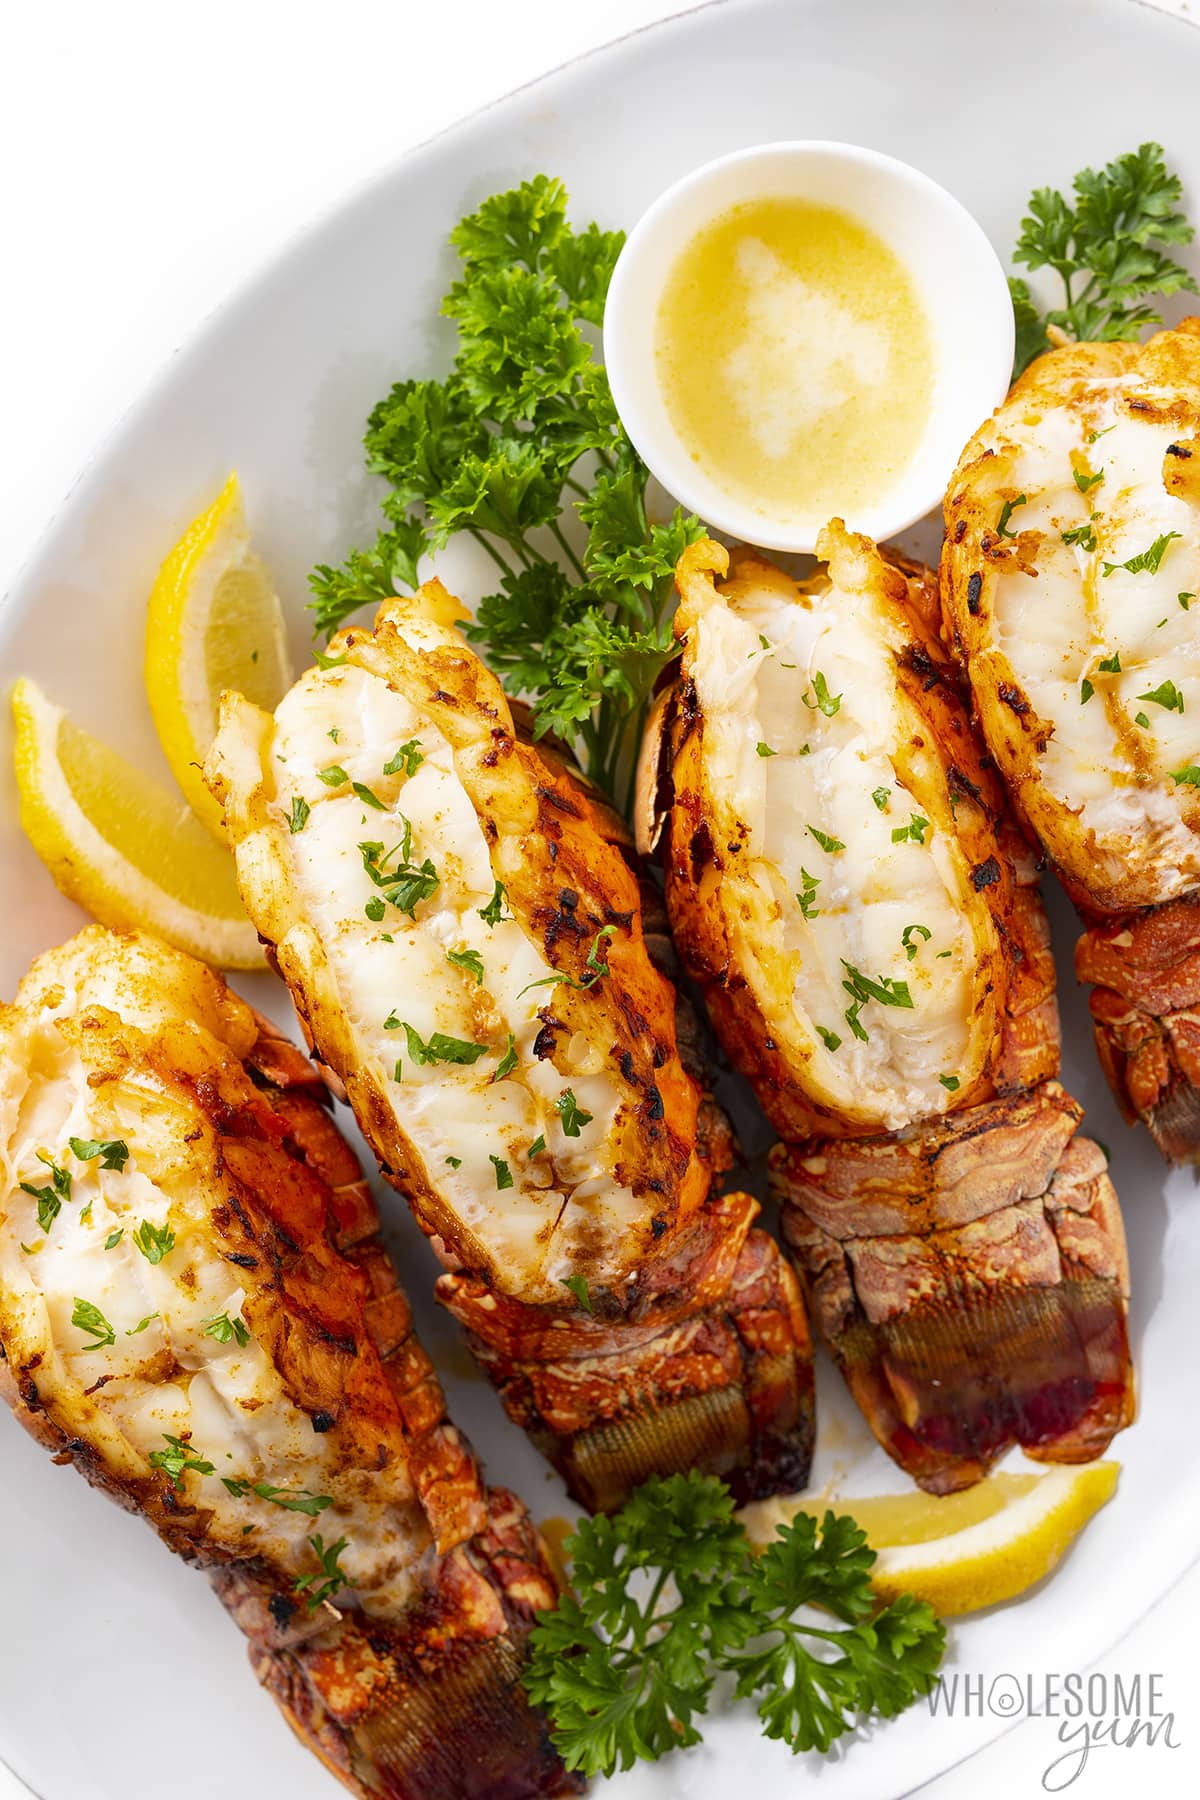 Lobster tails roasted in a dish.